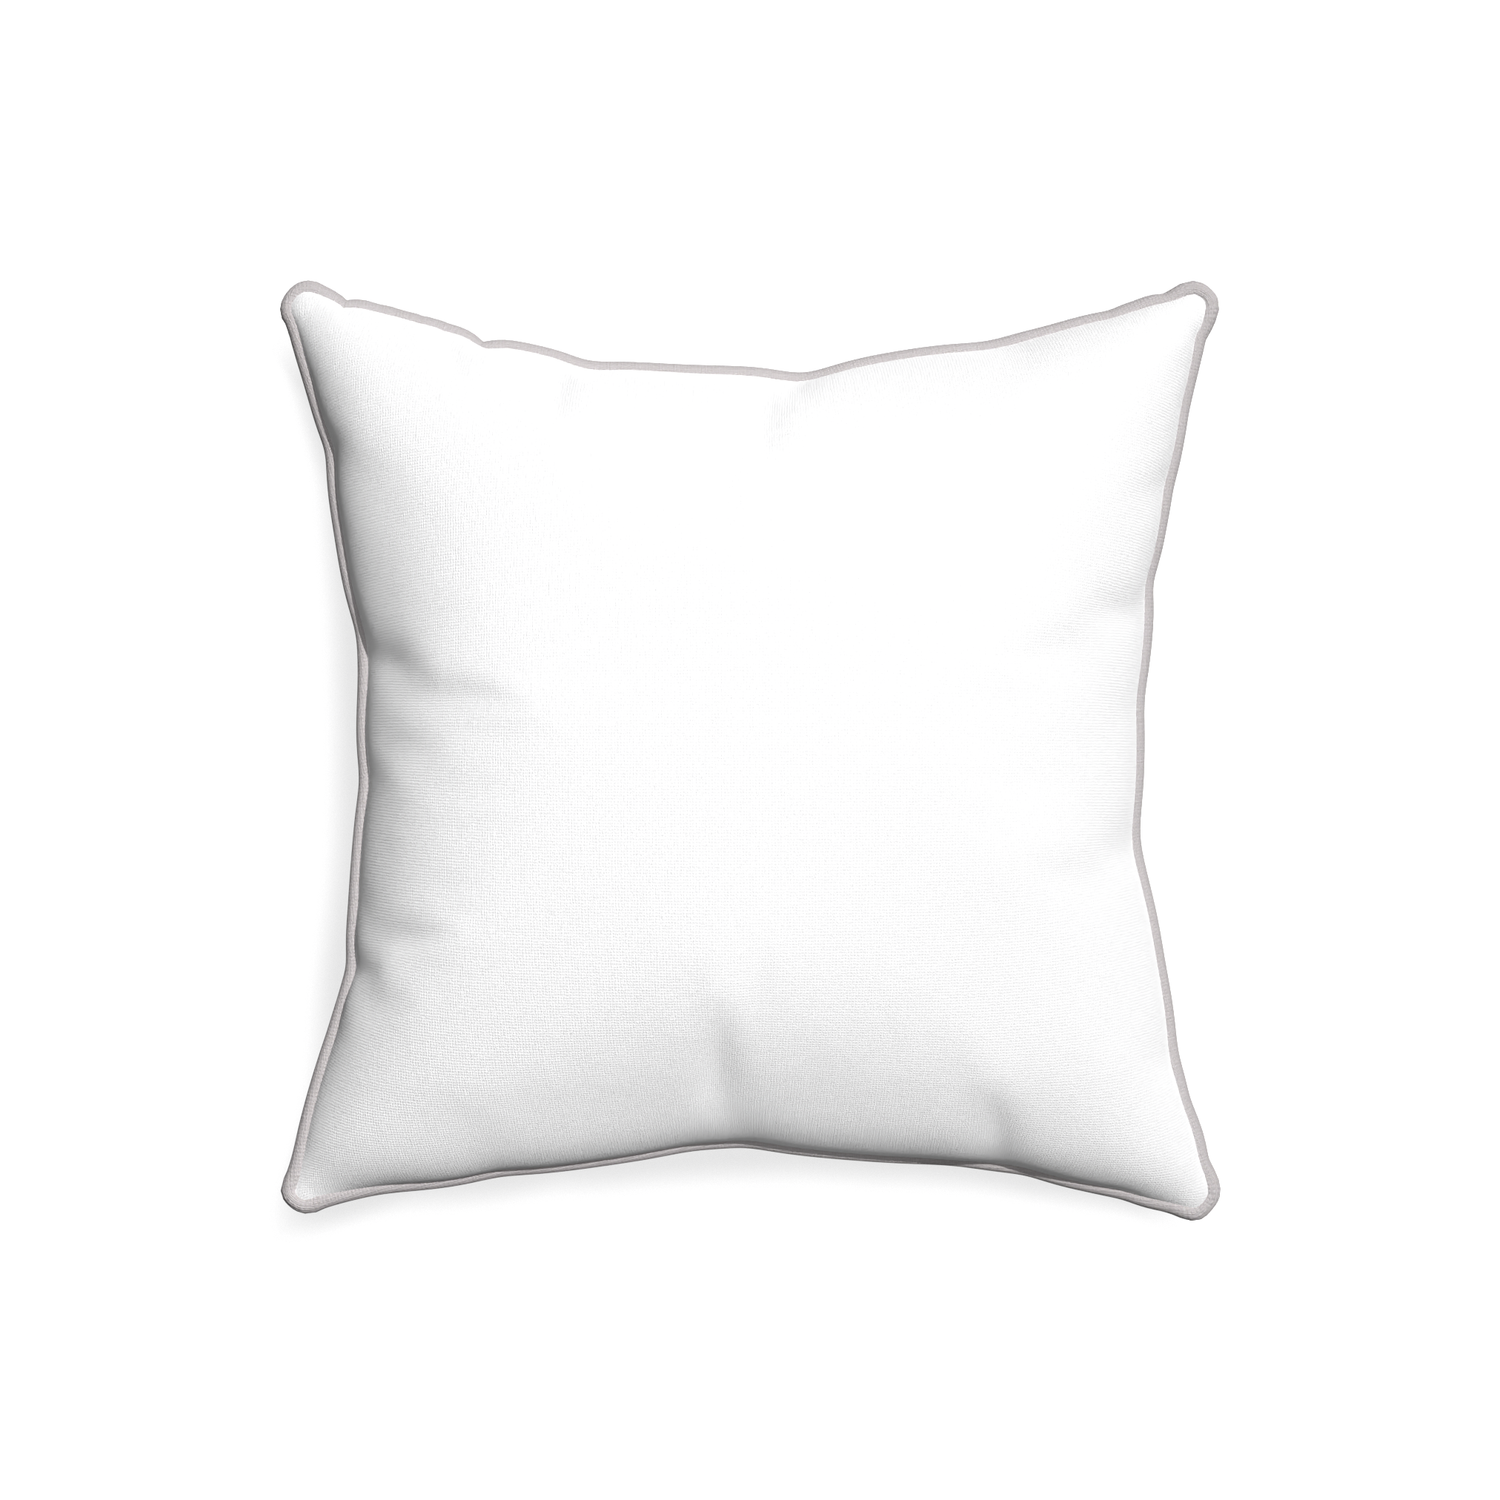 20-square snow custom pillow with pebble piping on white background